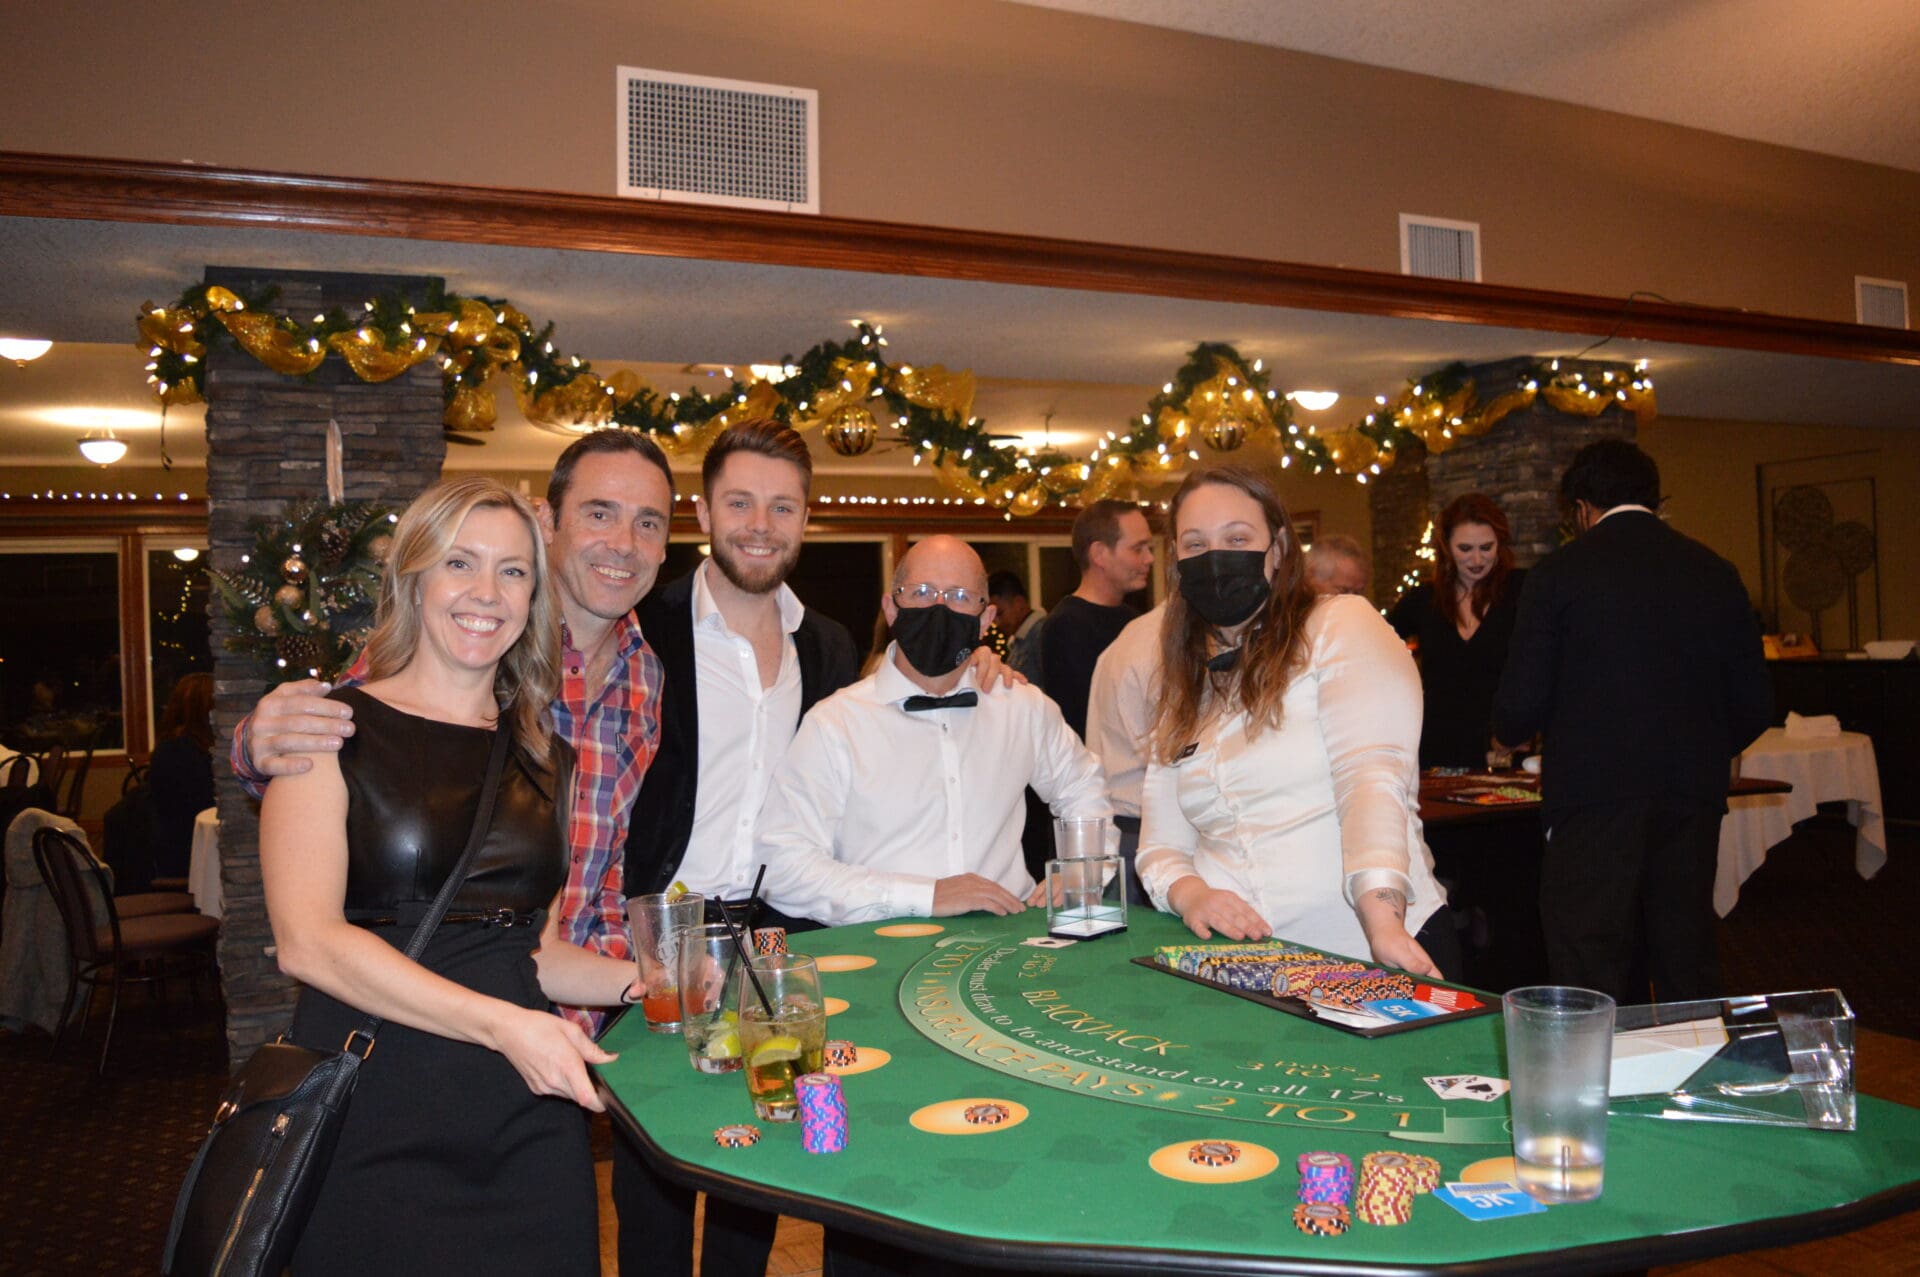 A group of people standing around a table with a casino theme.